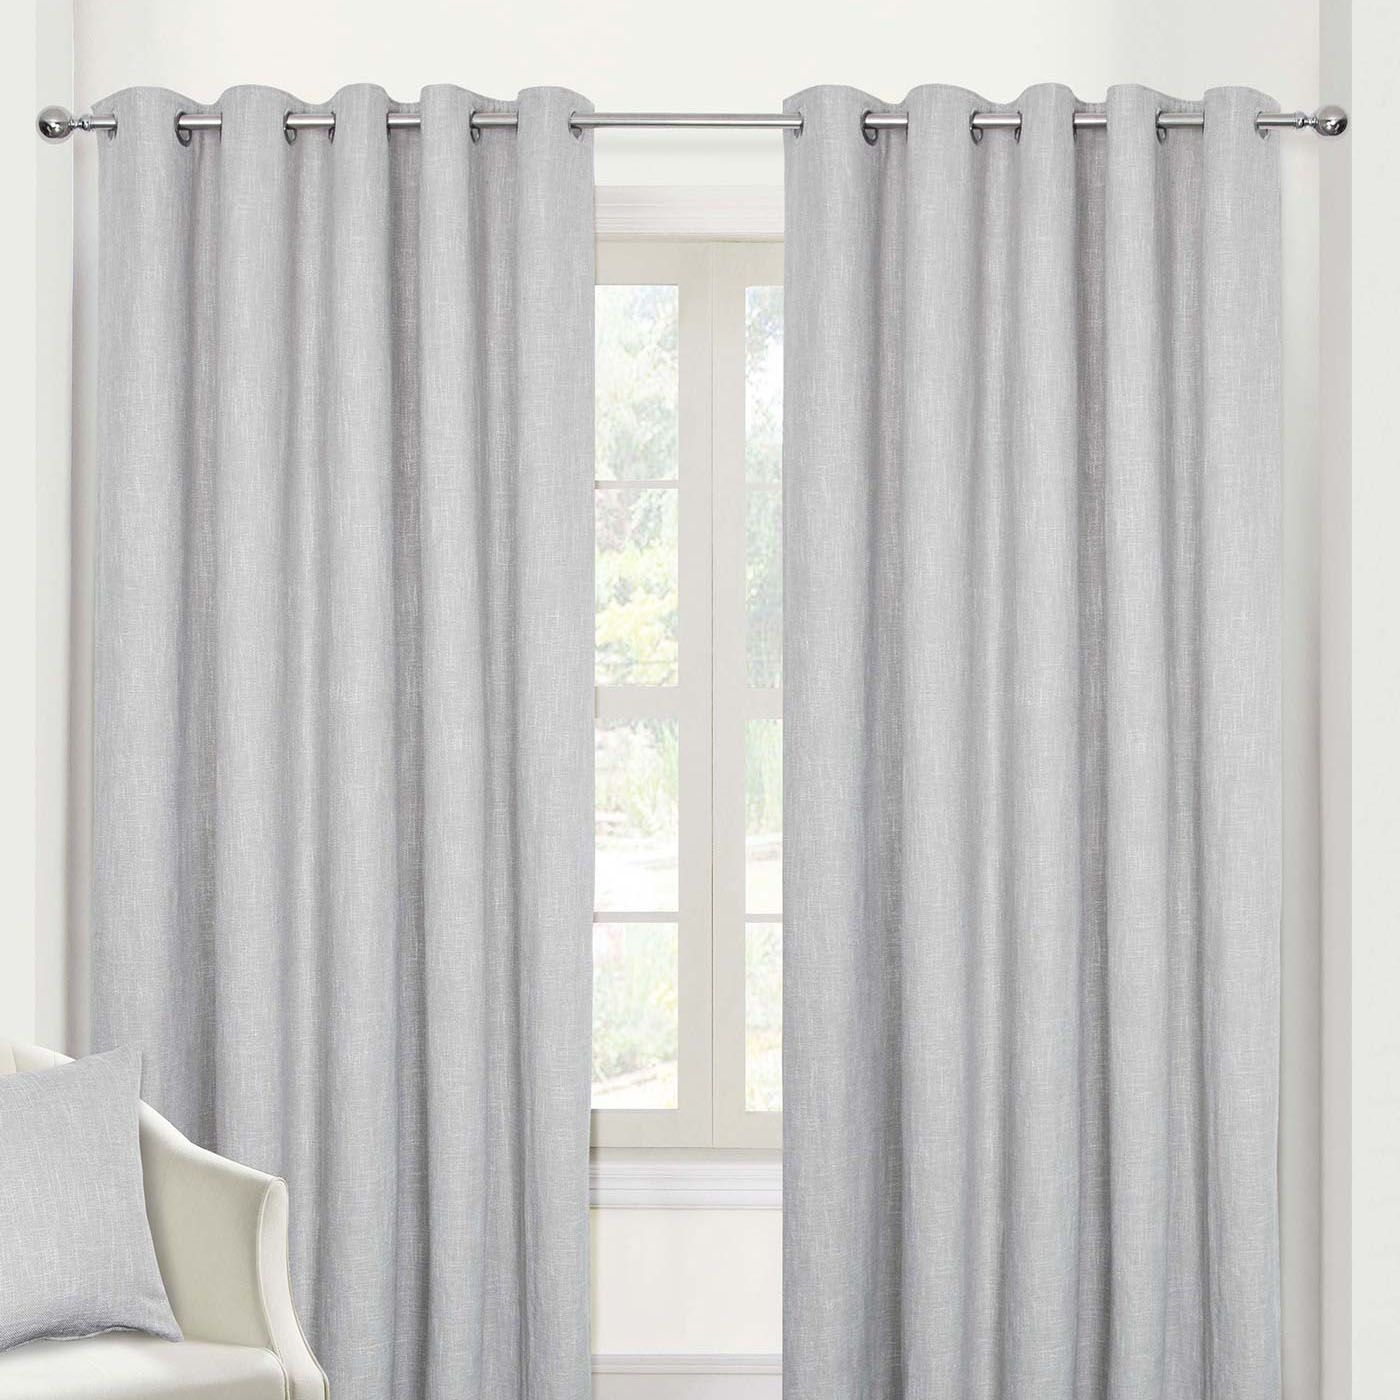 Grey Eyelet Curtains Jacquard Leaf Ready Made Lined Ring Top Curtain Pairs